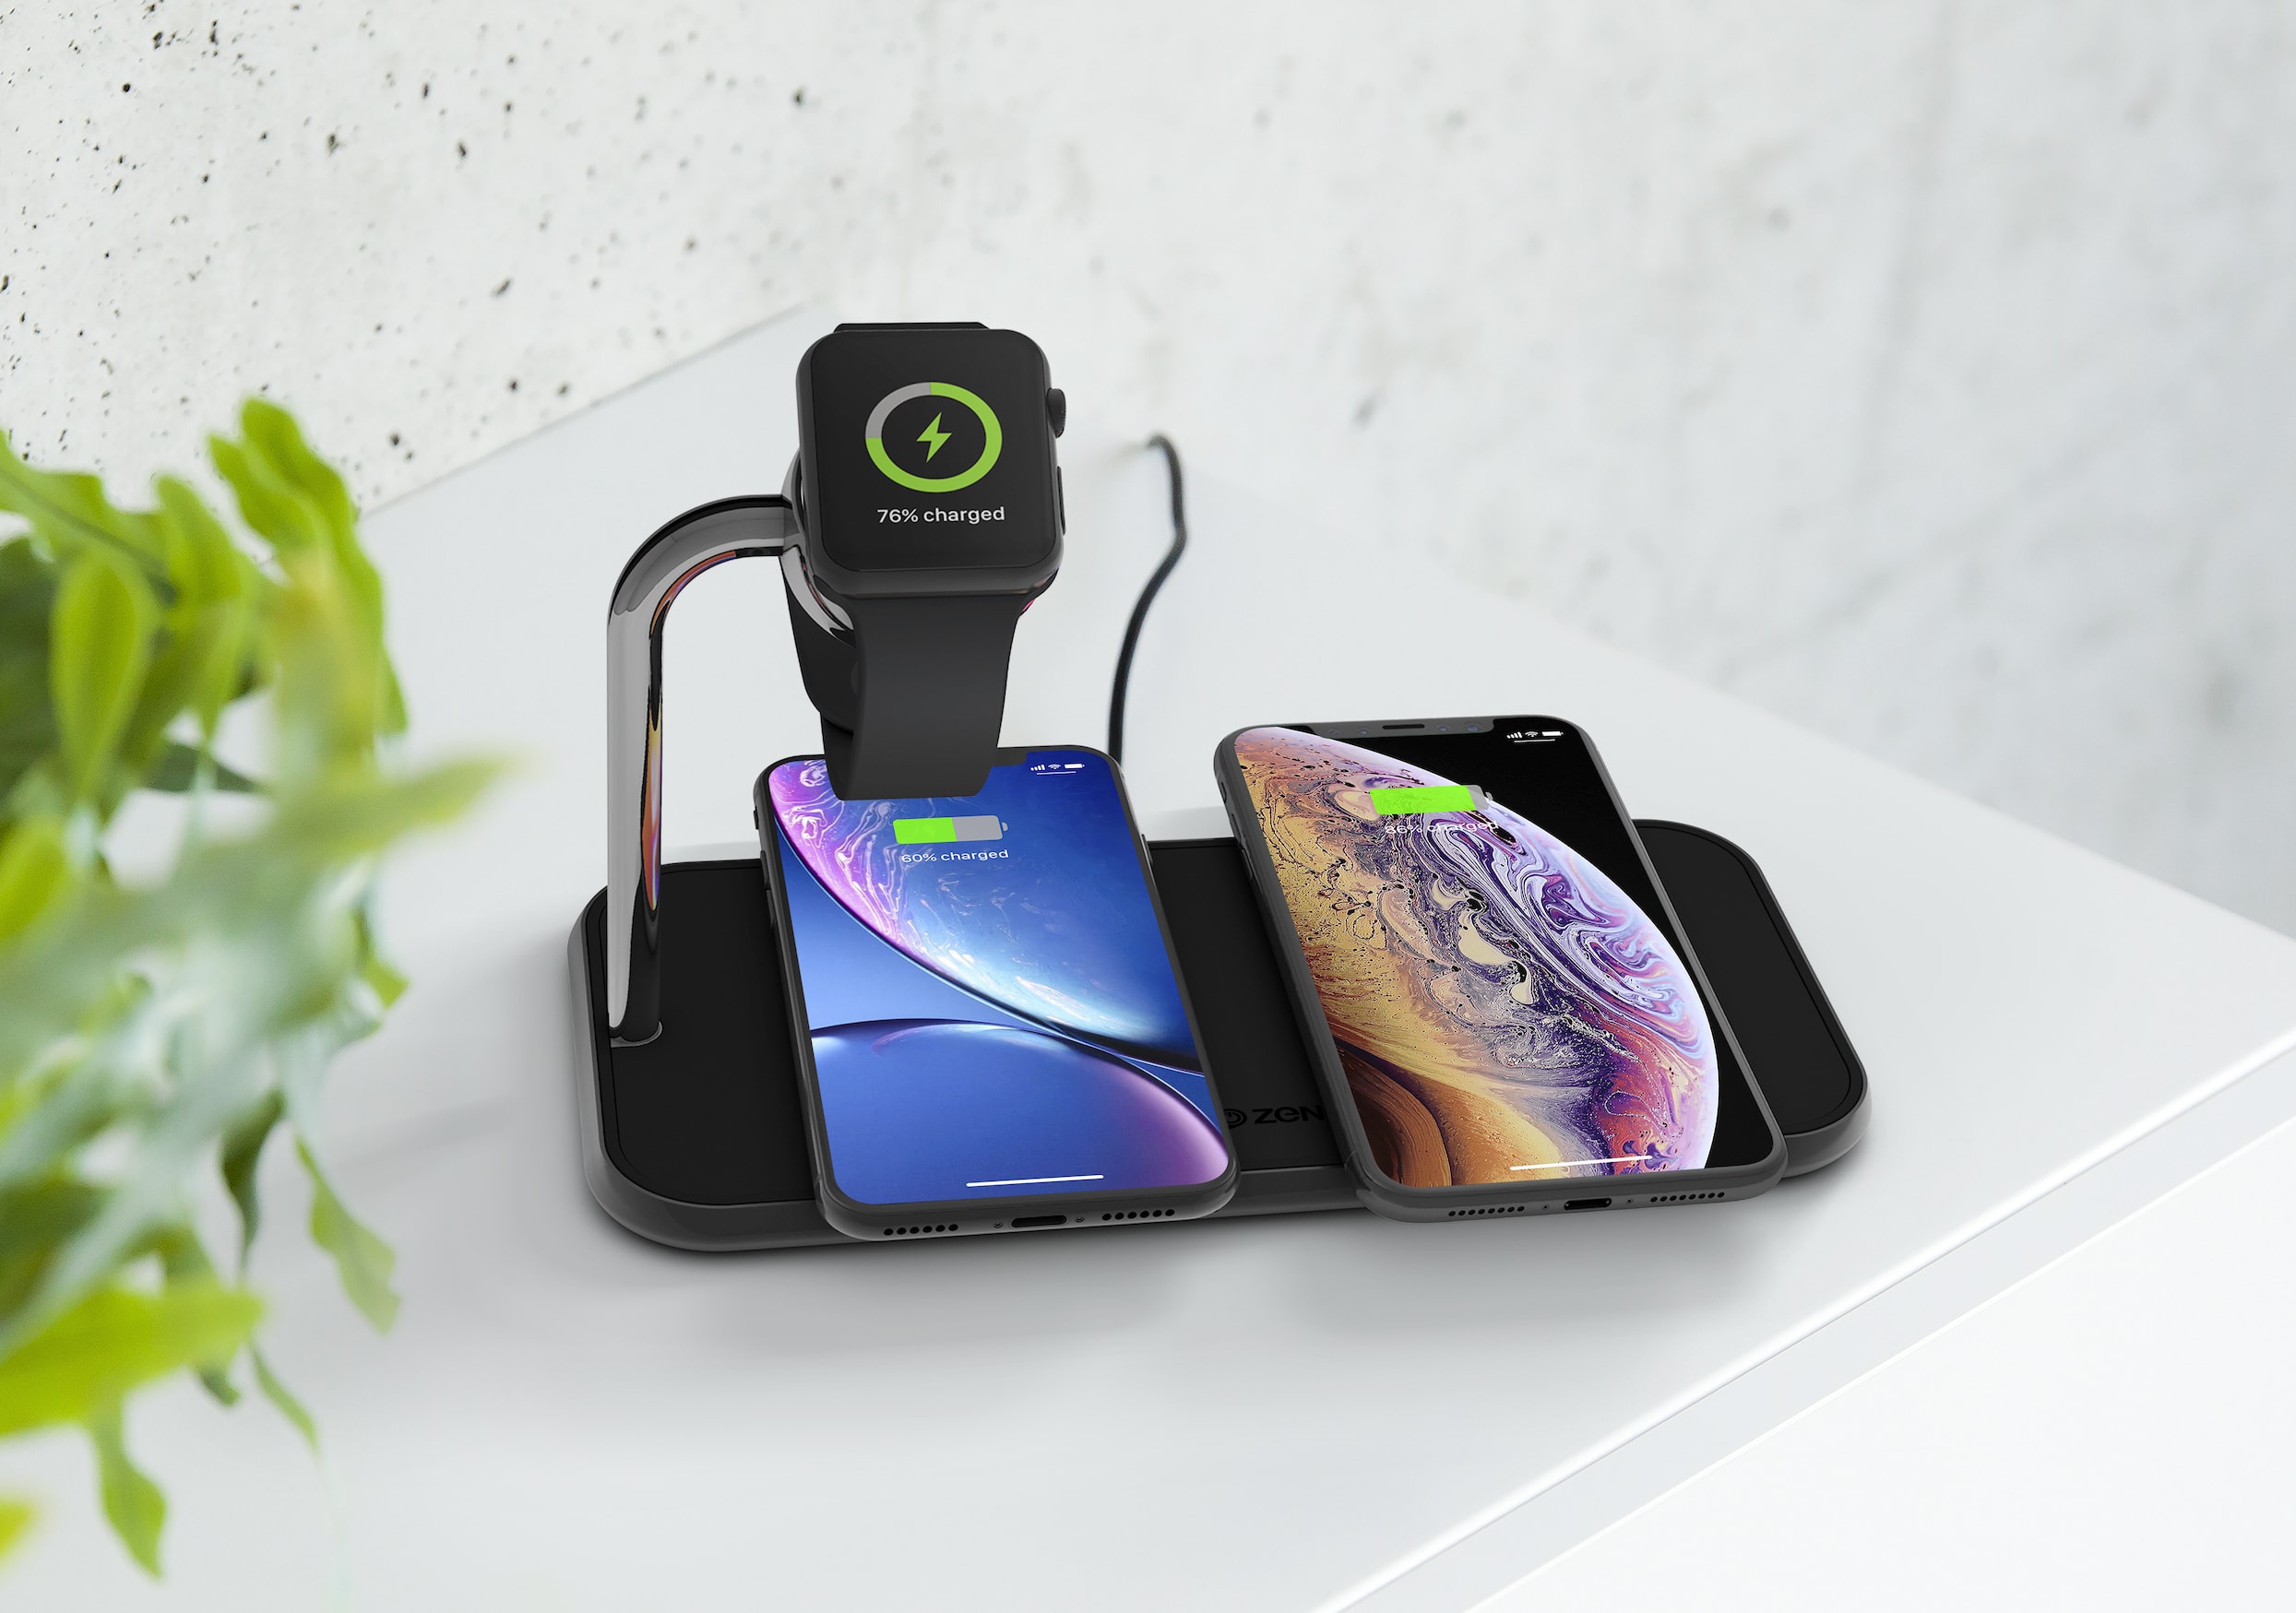 ZENS Dual Watch Aluminum Wireless Charger for iPhone Xr iPhone Xs